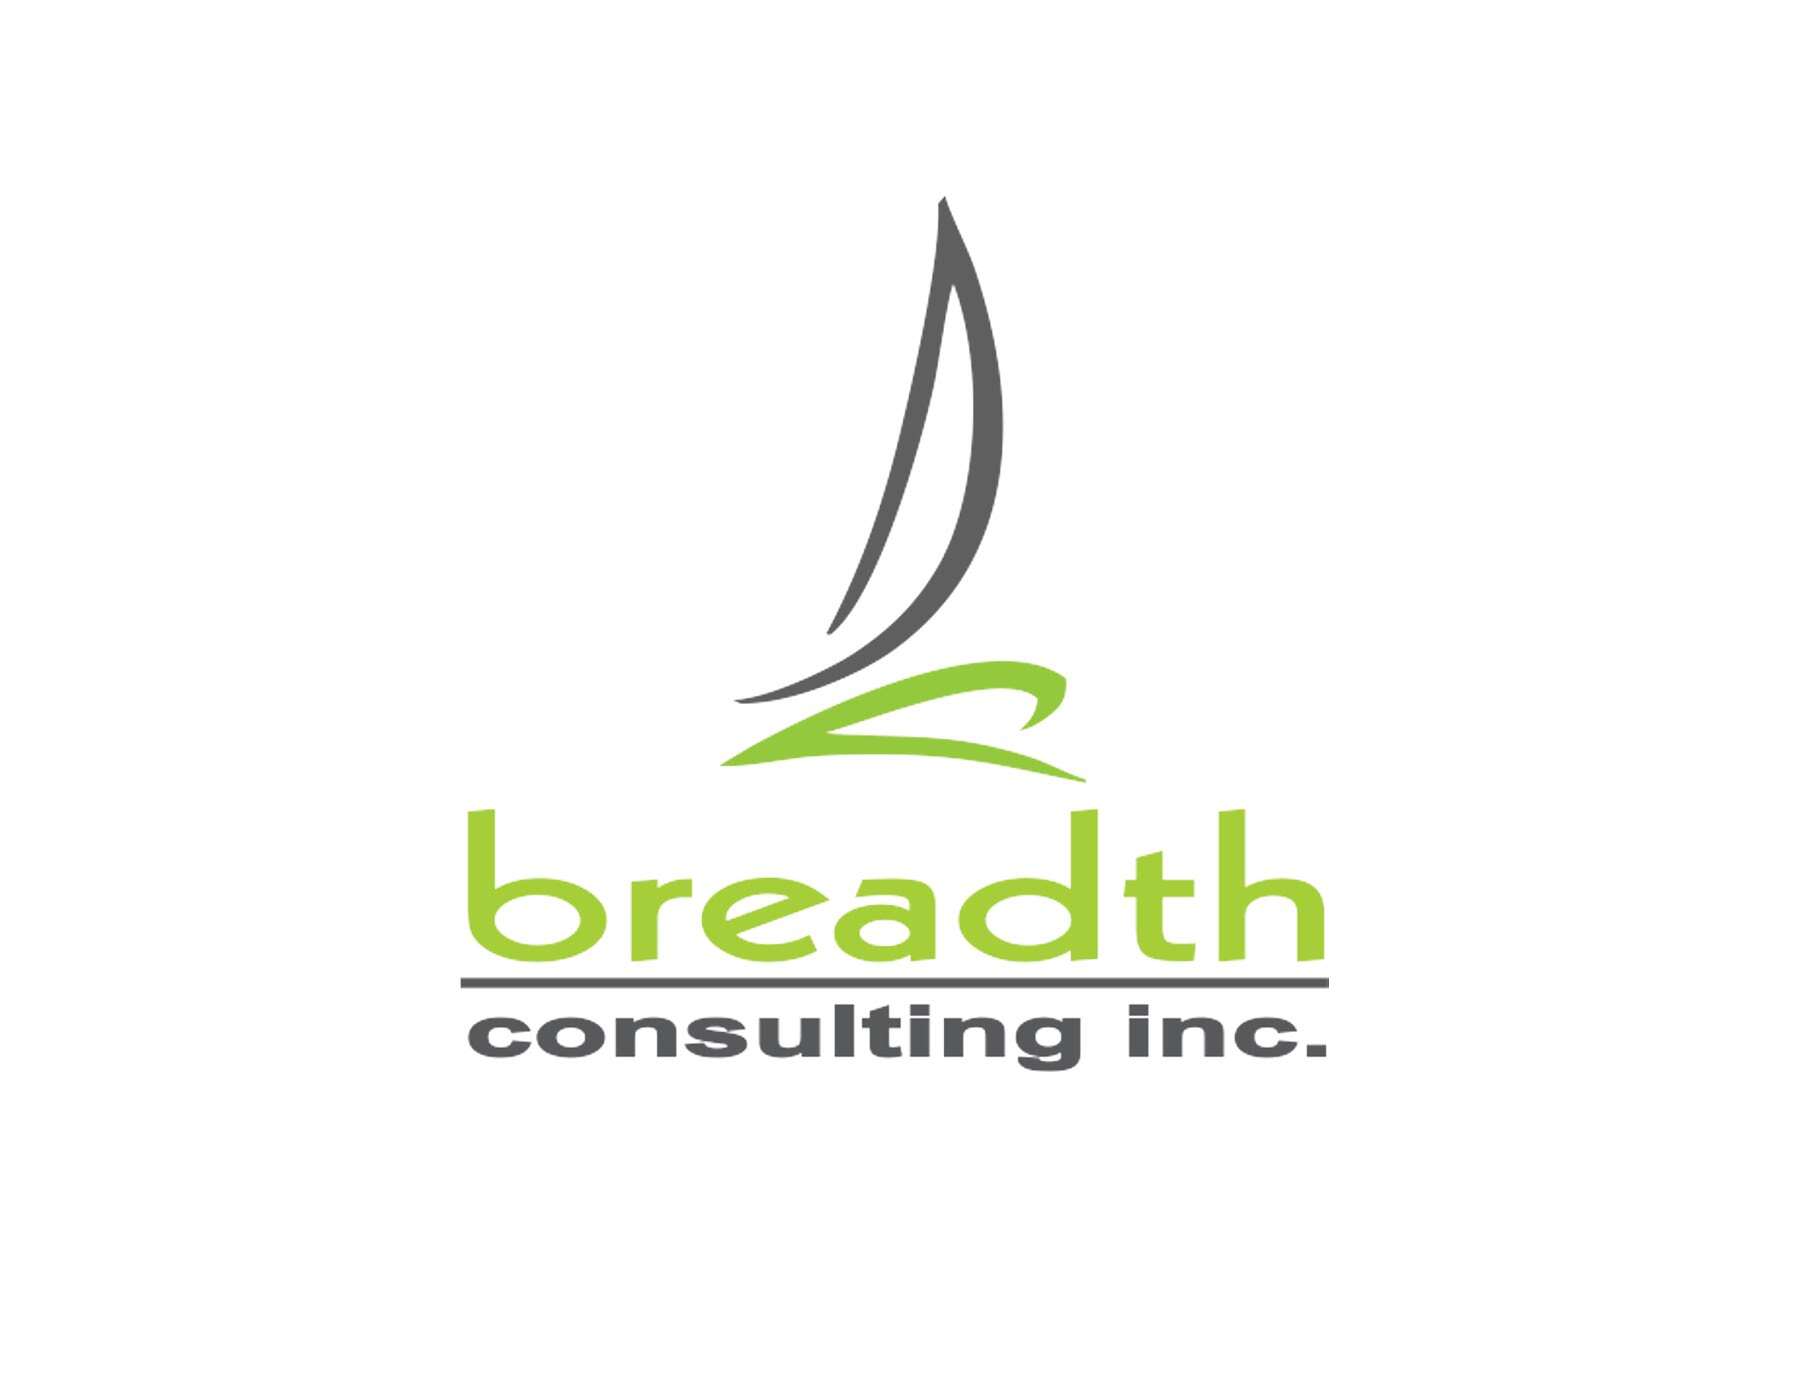 Breadth Consulting